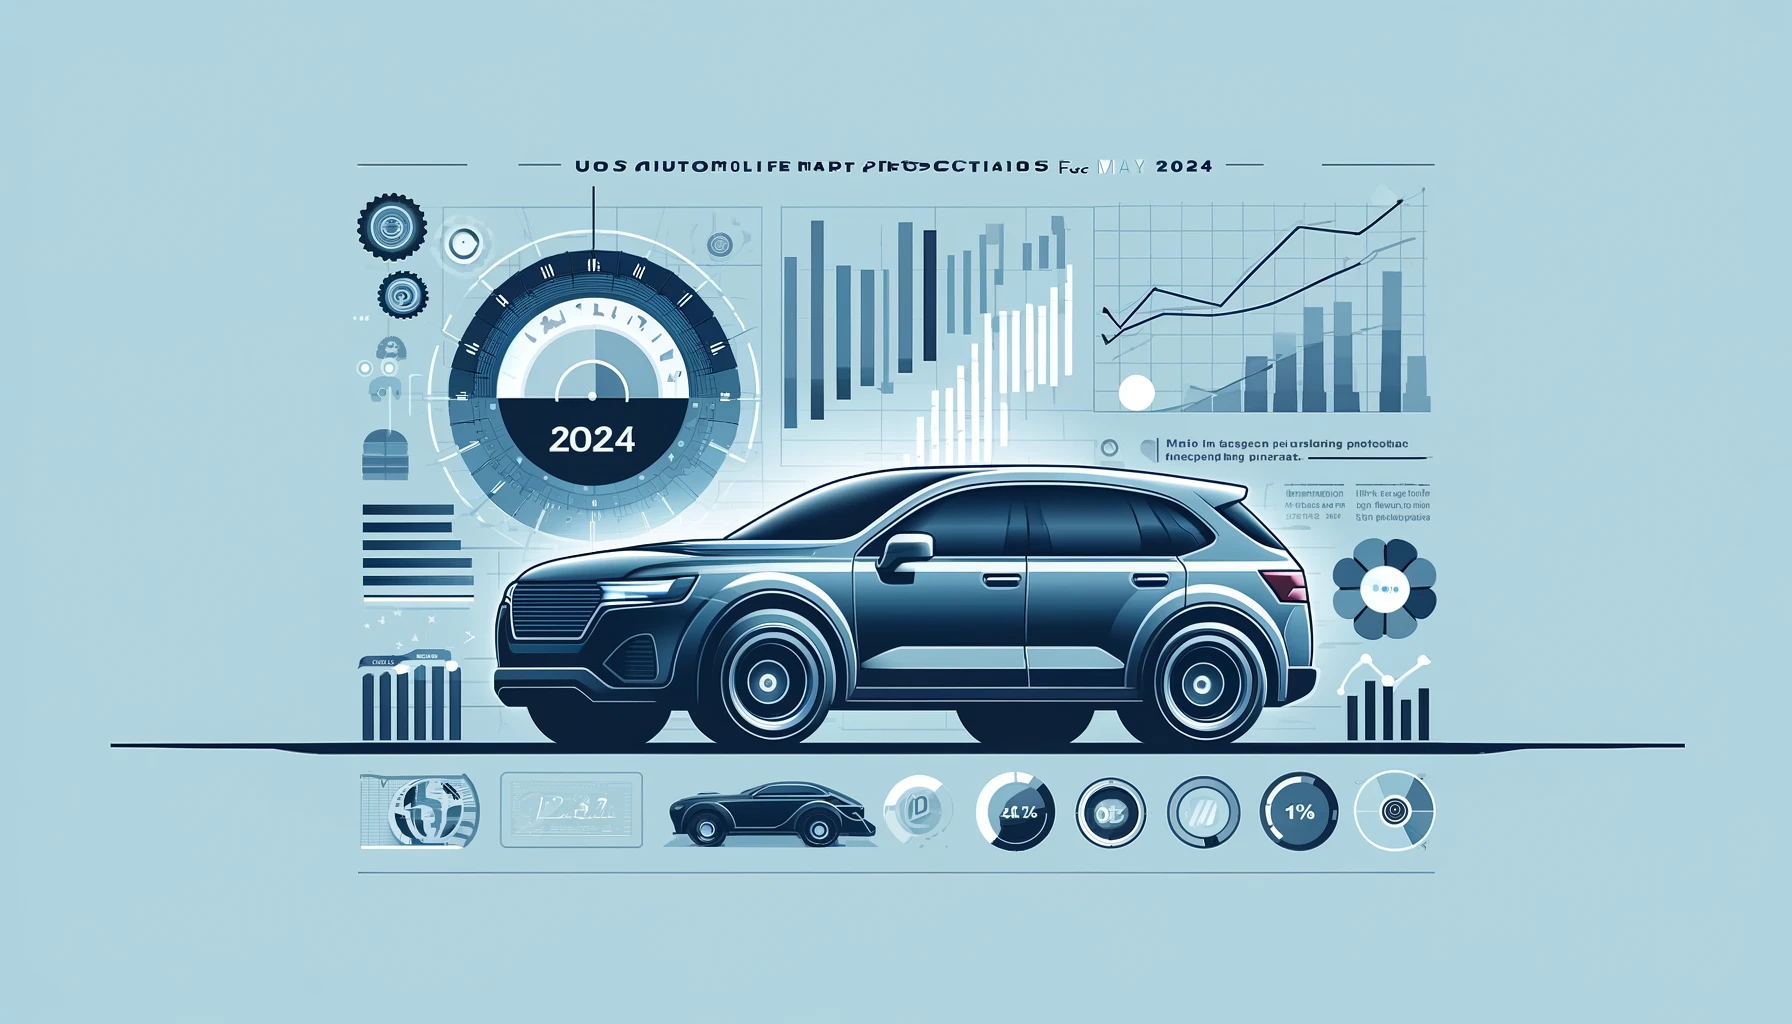 A banner image for the article "US Automotive Market Projections for May 2024," featuring a stylized car, simple graphs, and charts indicating market trends. The design uses a professional color scheme with shades of blue and gray, with the title prominently displayed.